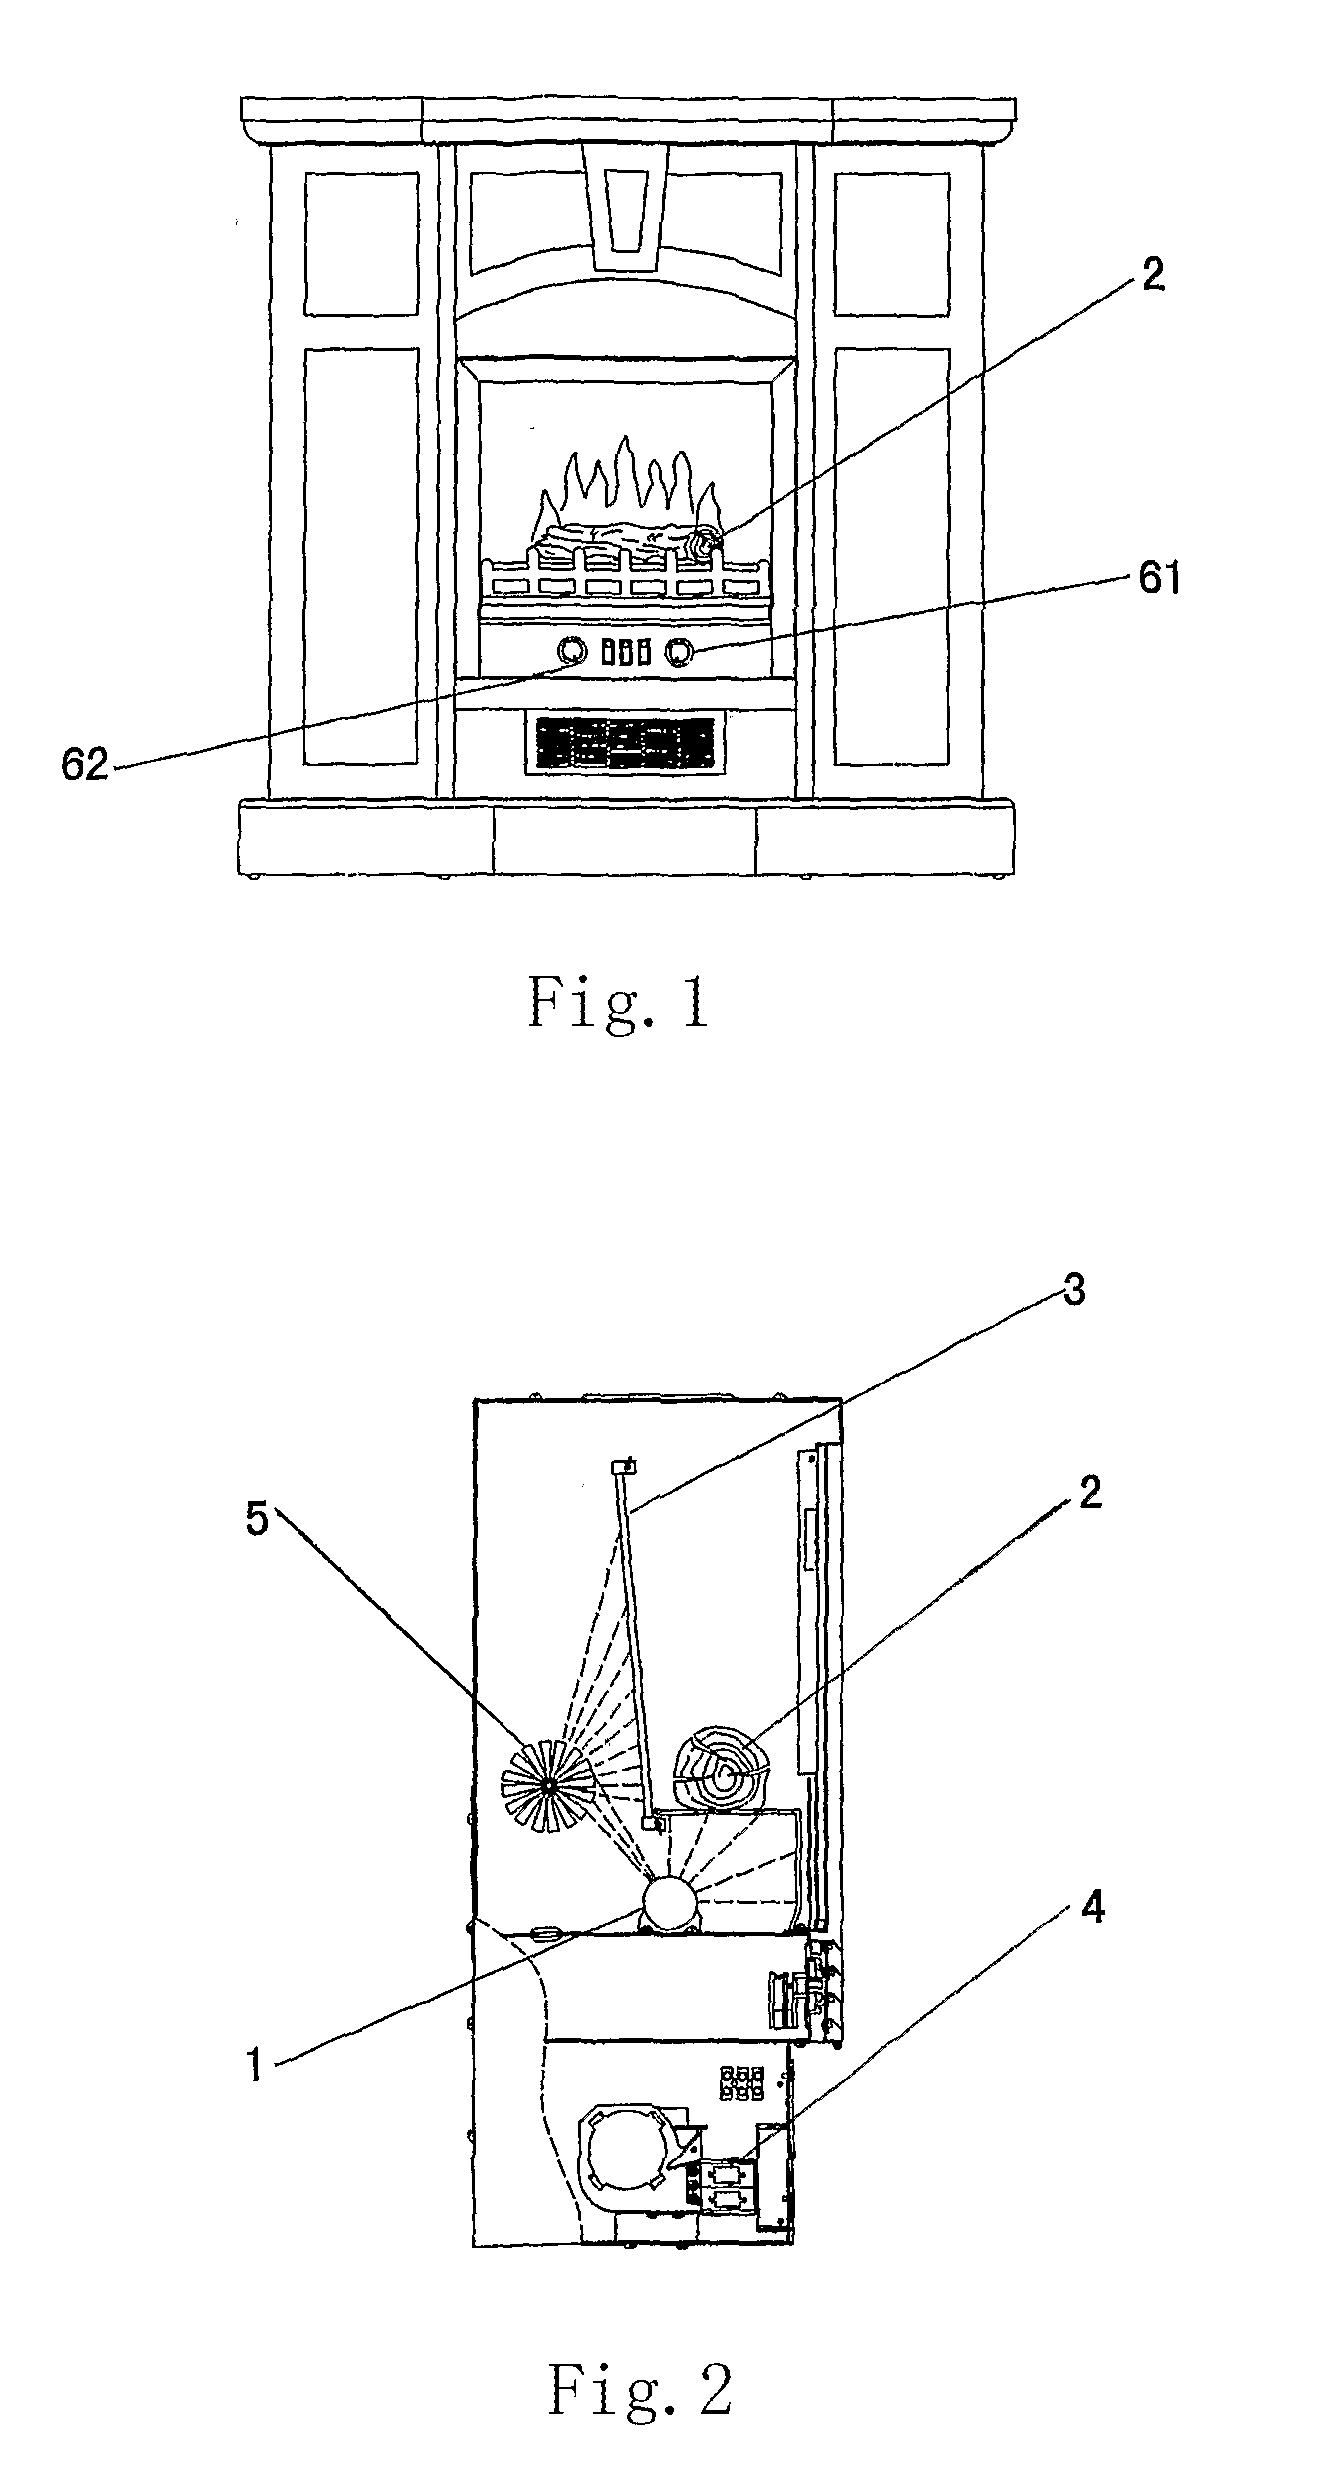 Flame simulator of electric fireplace